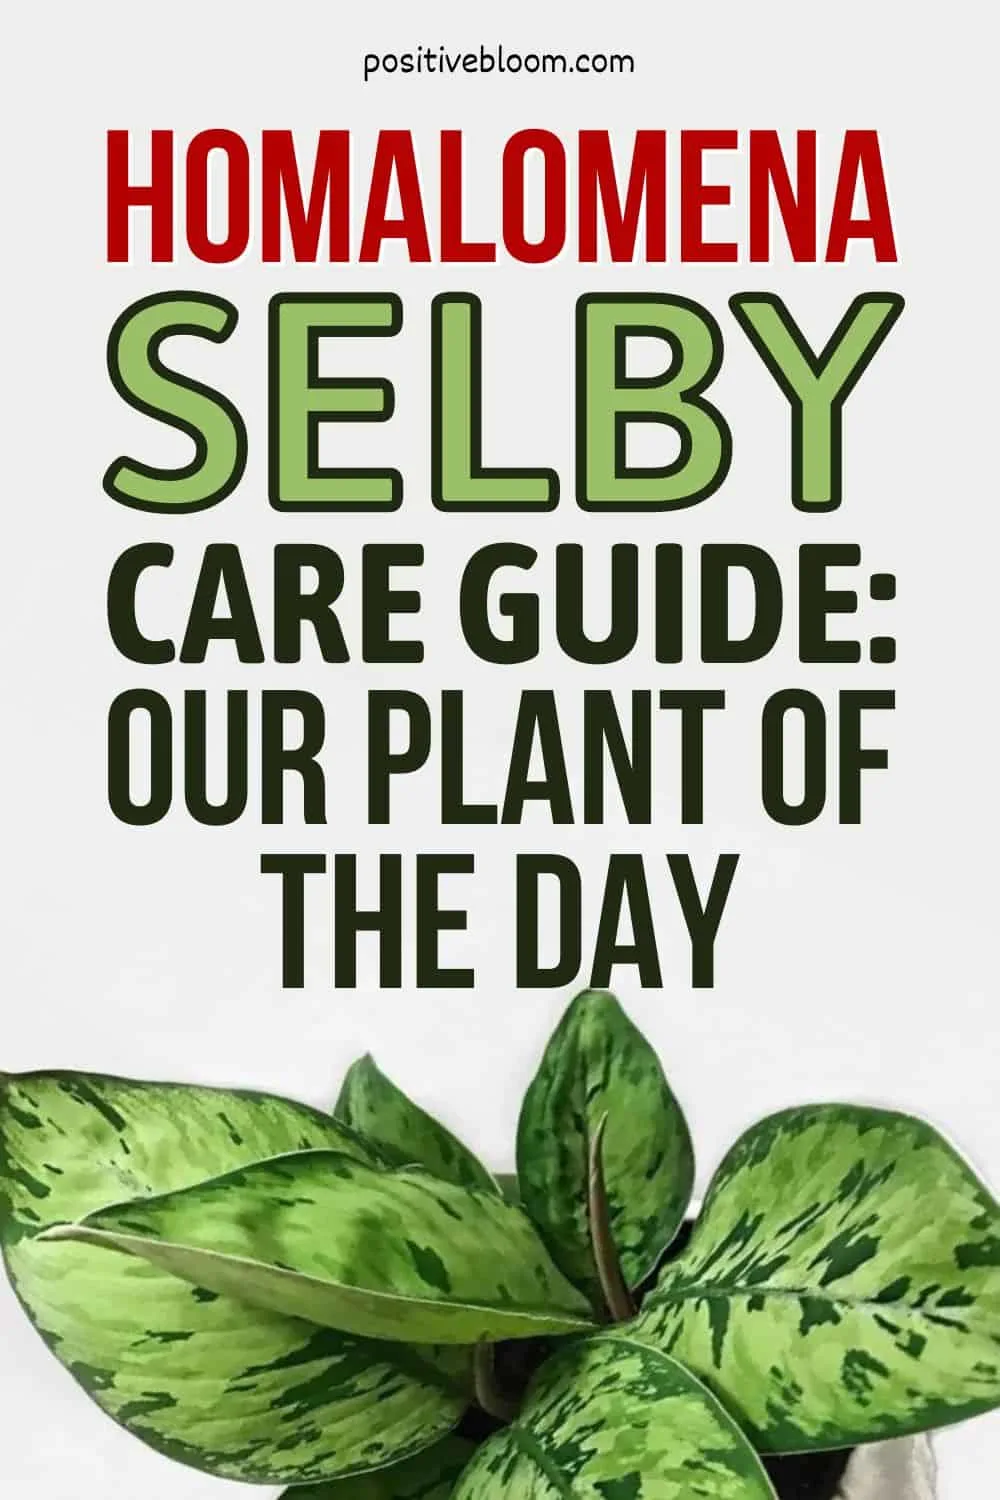 Homalomena Selby Care Guide Our Plant Of The Day Pinterest